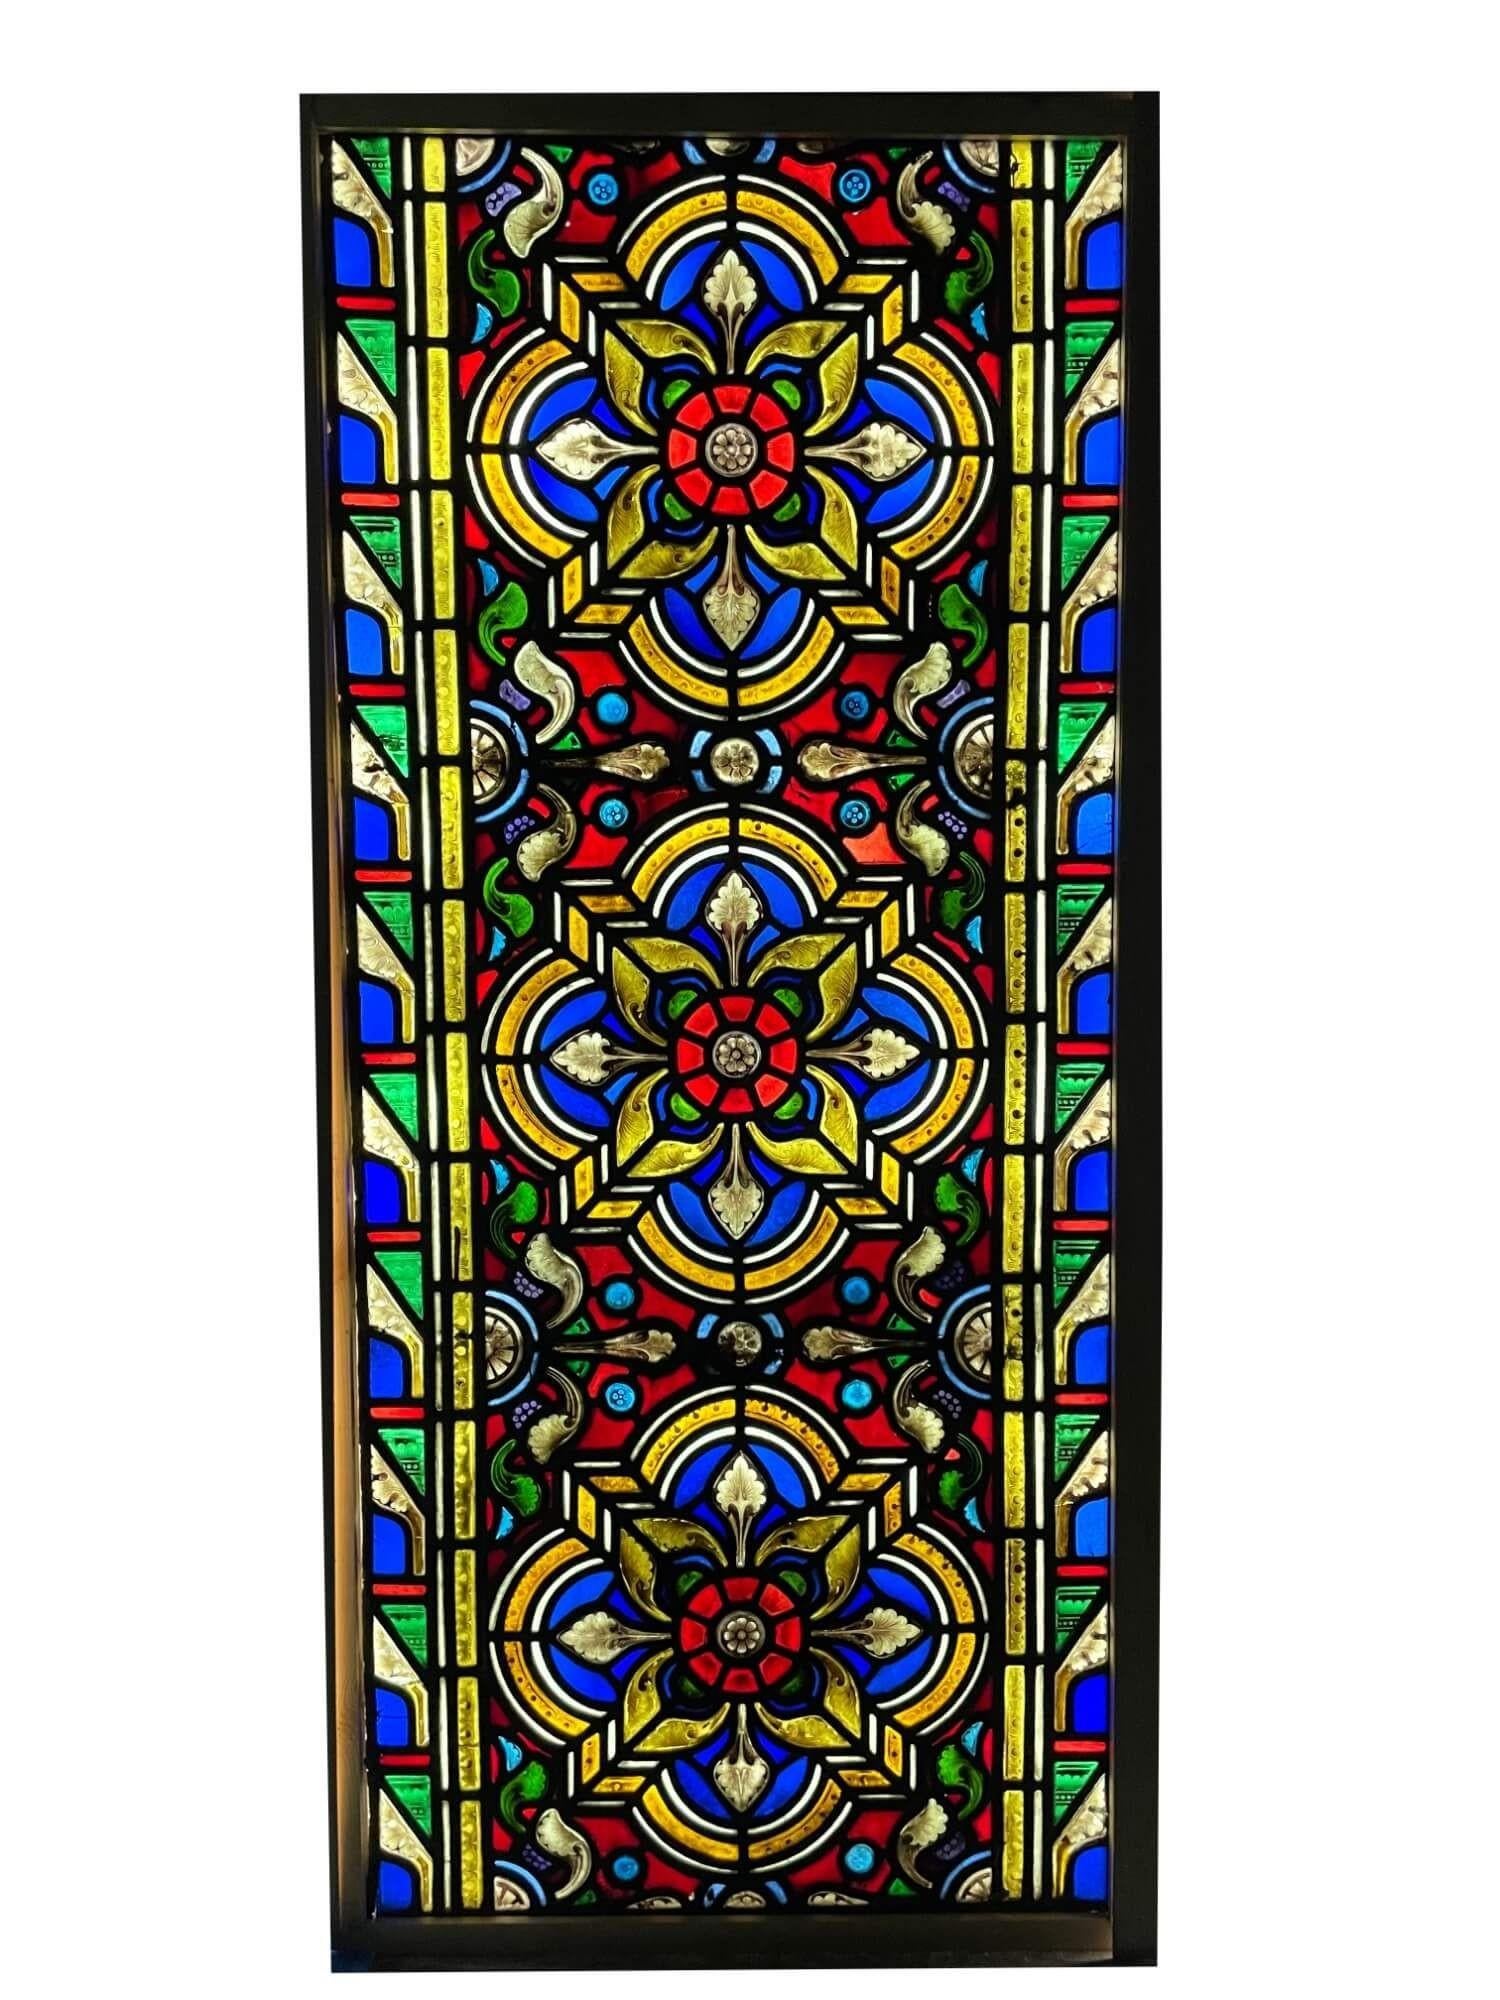 An antique Victorian late 19th century stained glass window, originally from a church in northern England. Three hand painted detailed flowers, thought to be Tudor Rose, sit at the heart of this piece. It incorporates both ecclesiastical and